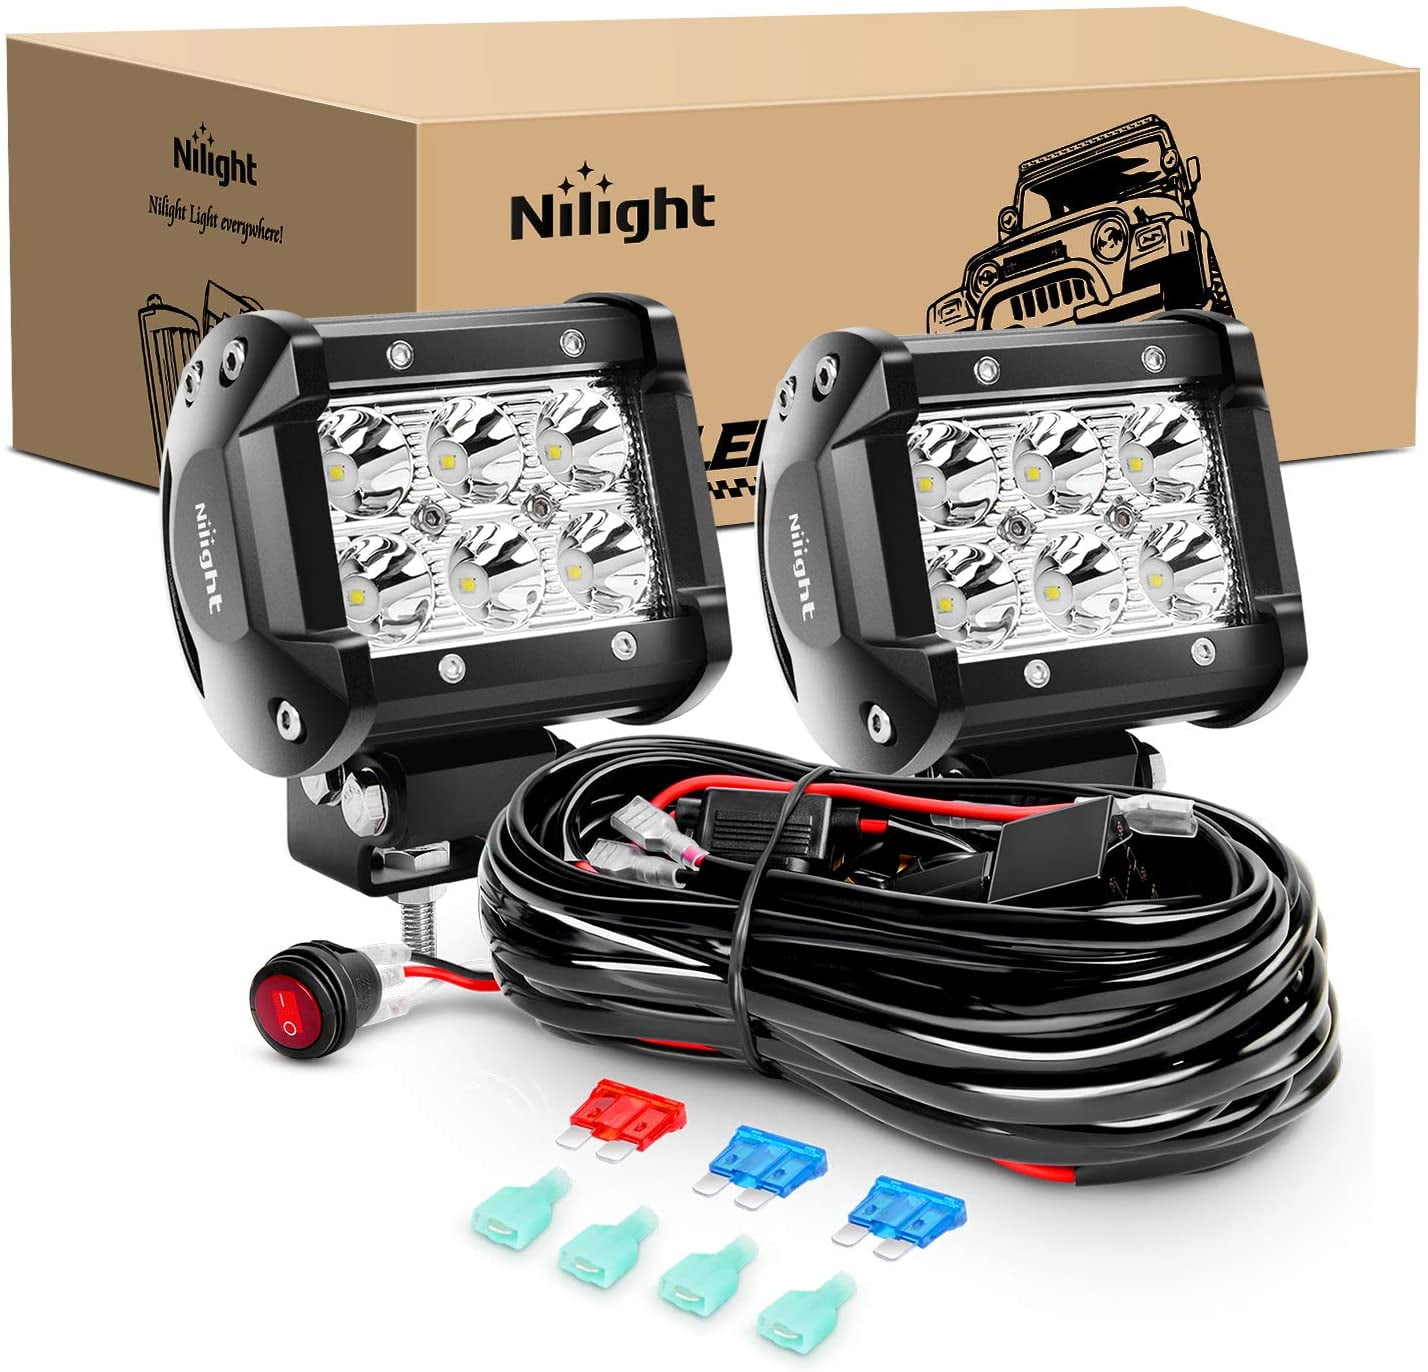 Nilight LED Light 2PCS 18W Spot Off Road Lights with 16AWG Wiring Harness Kit-2 Leads, 2 Years Warranty Walmart.com